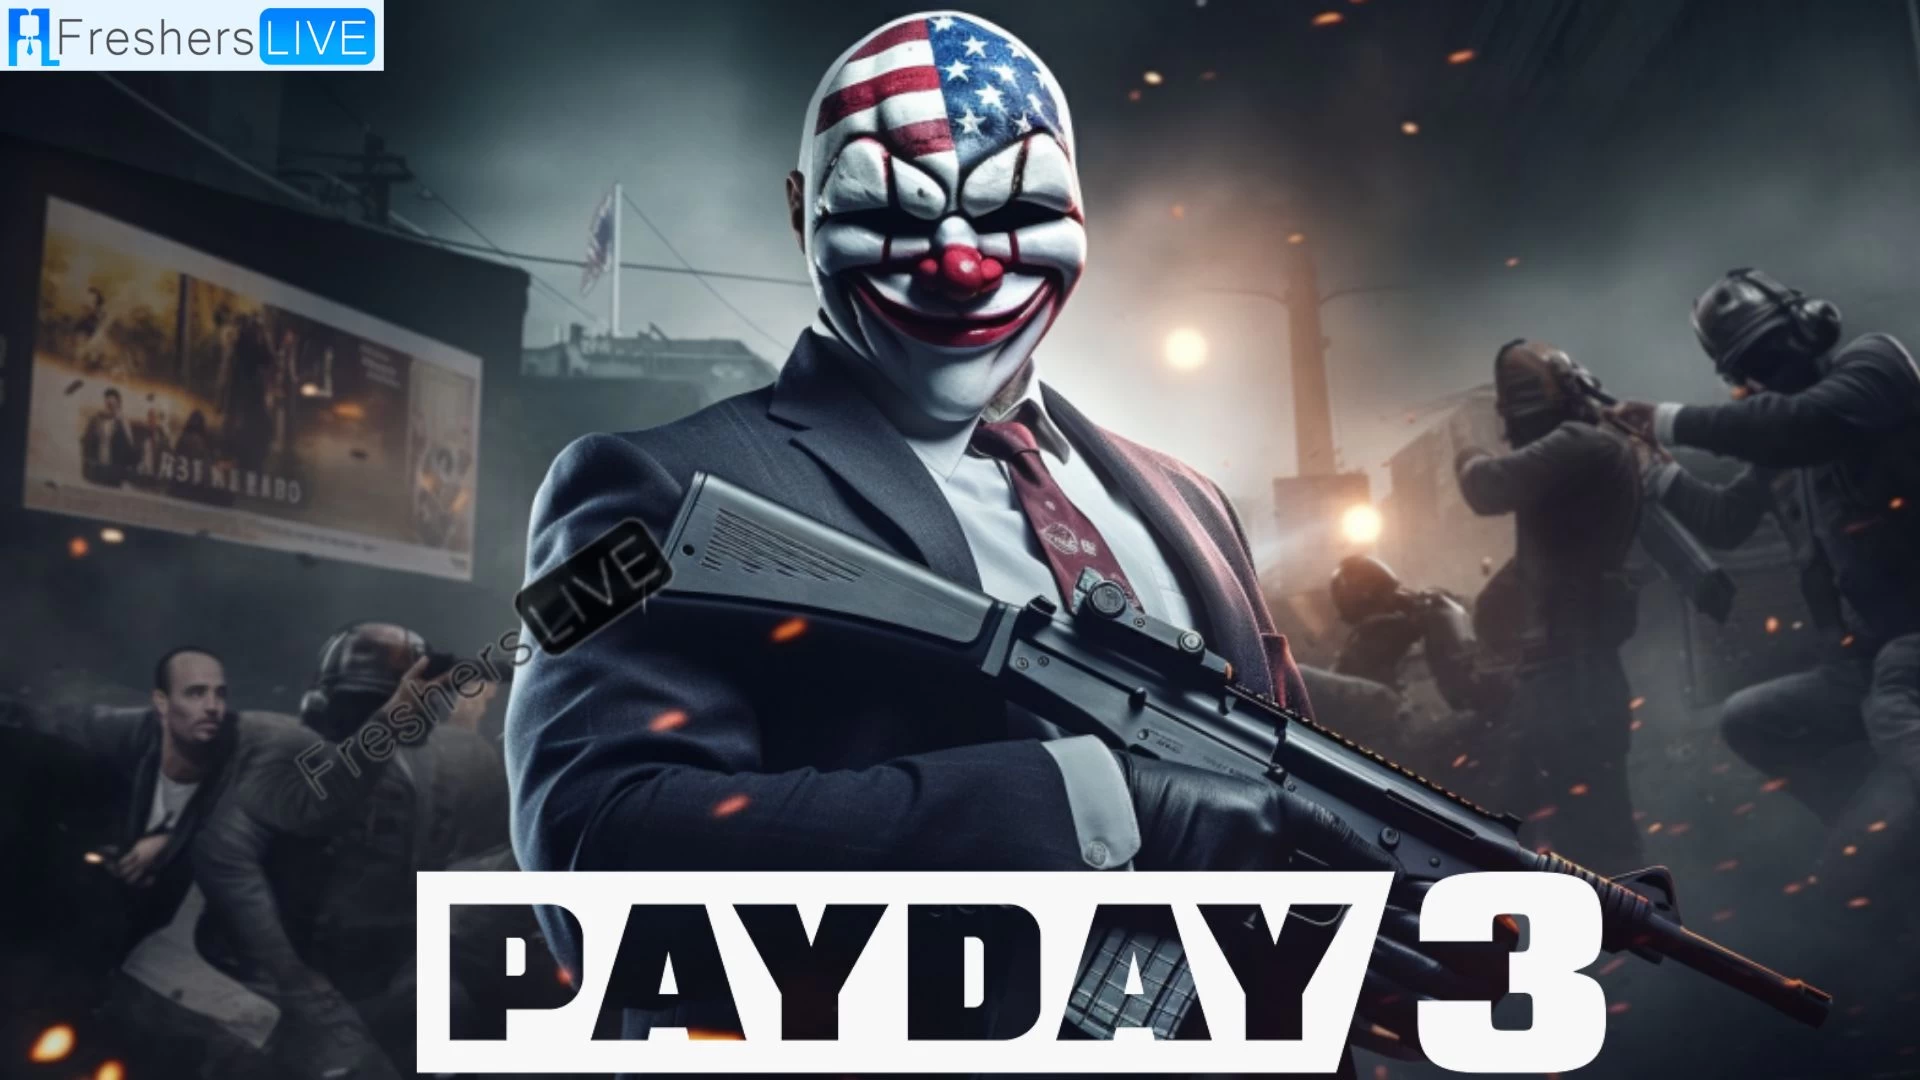 How to Open Safes in Payday 3? A Step-by-Step Guide